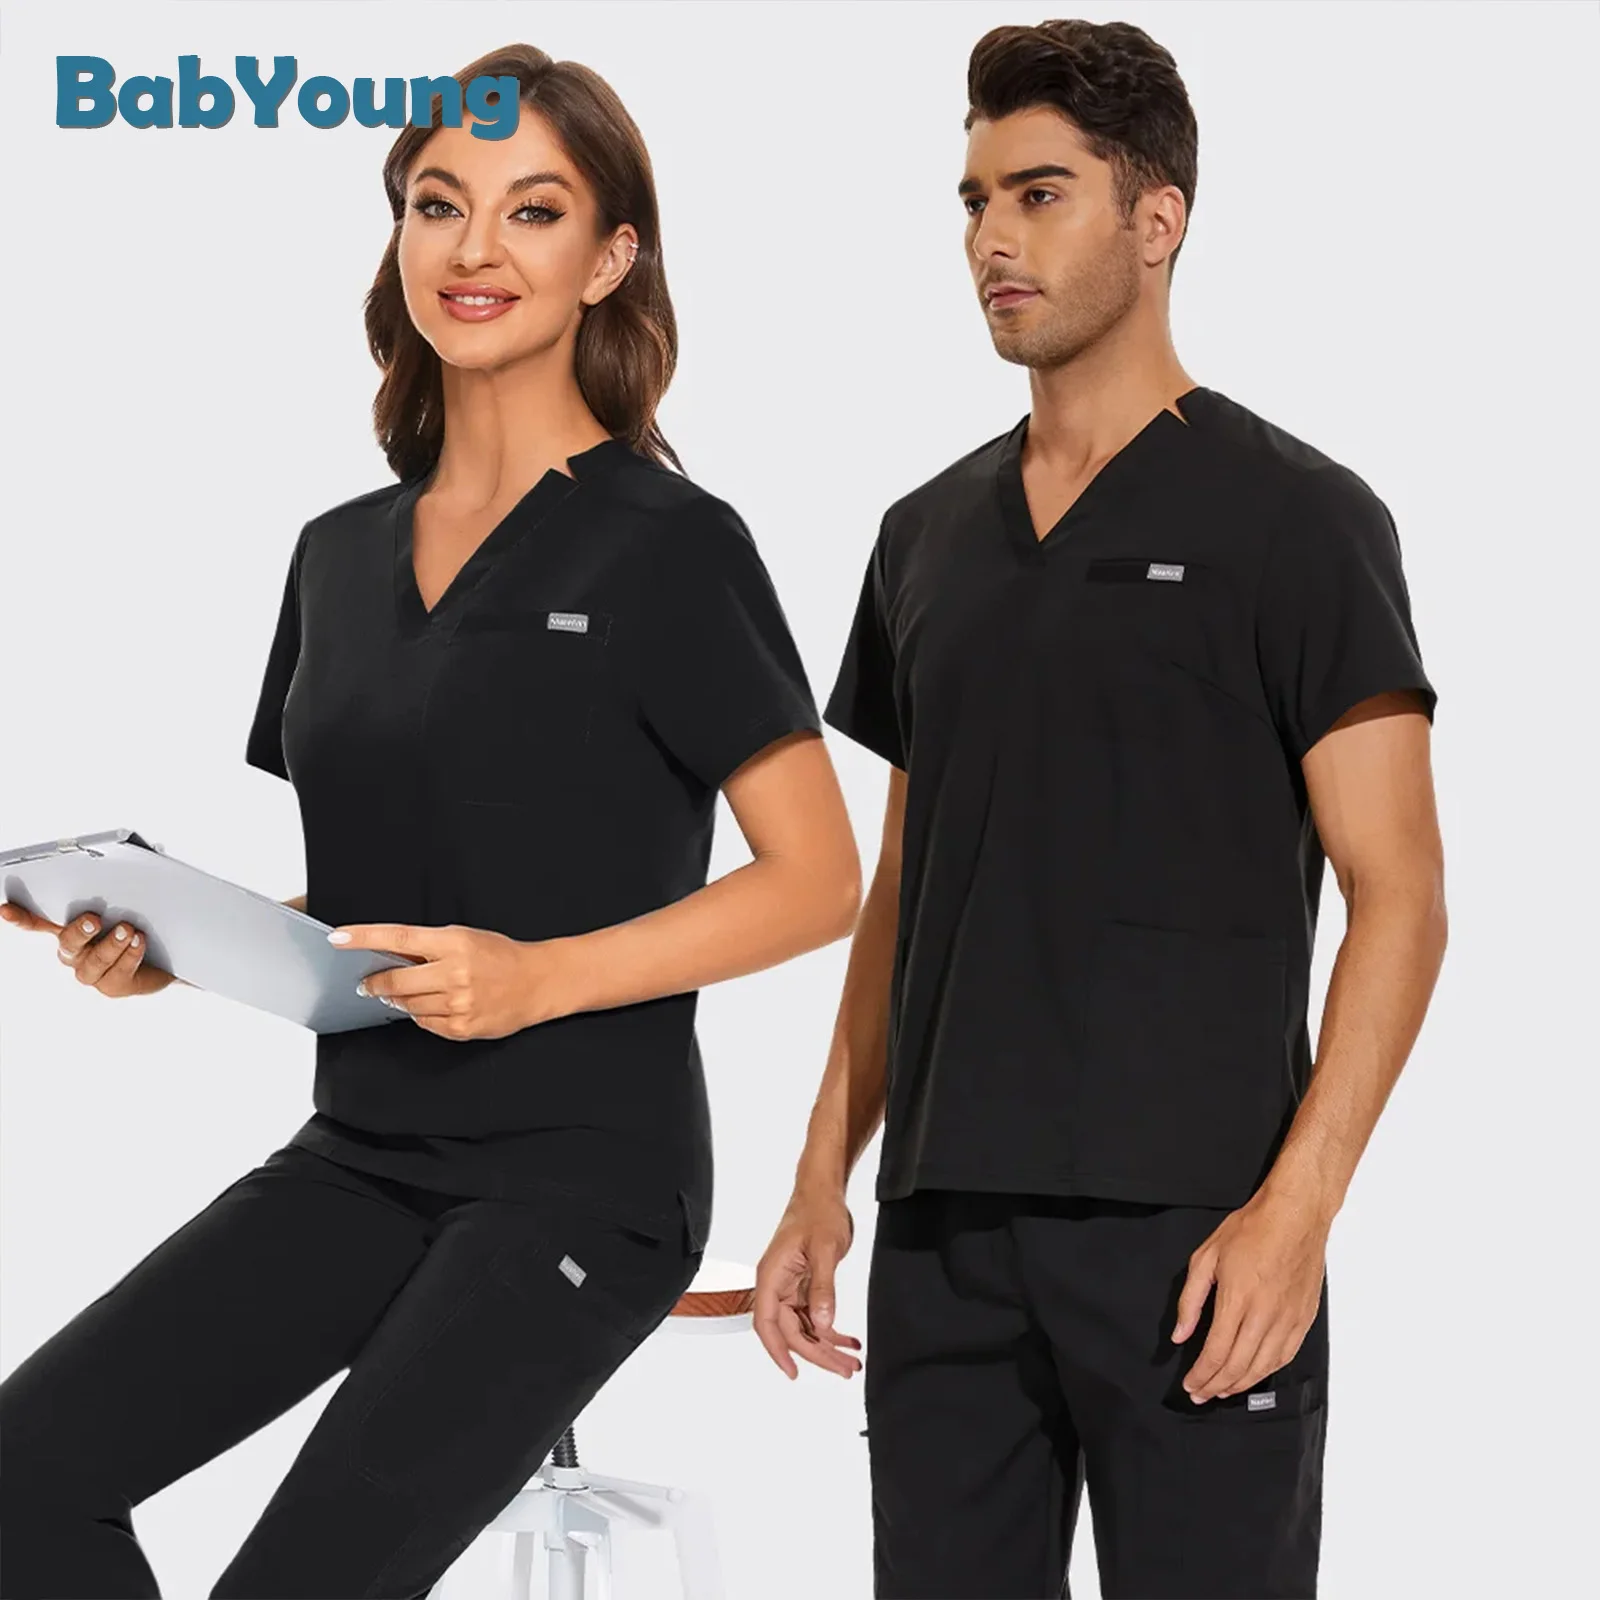 

Hospital Nurse Shirts Medical Uniform High Quality Pet Grooming Workwear Scrubs Tops Operating Room Surgical Gown Short Sleeve